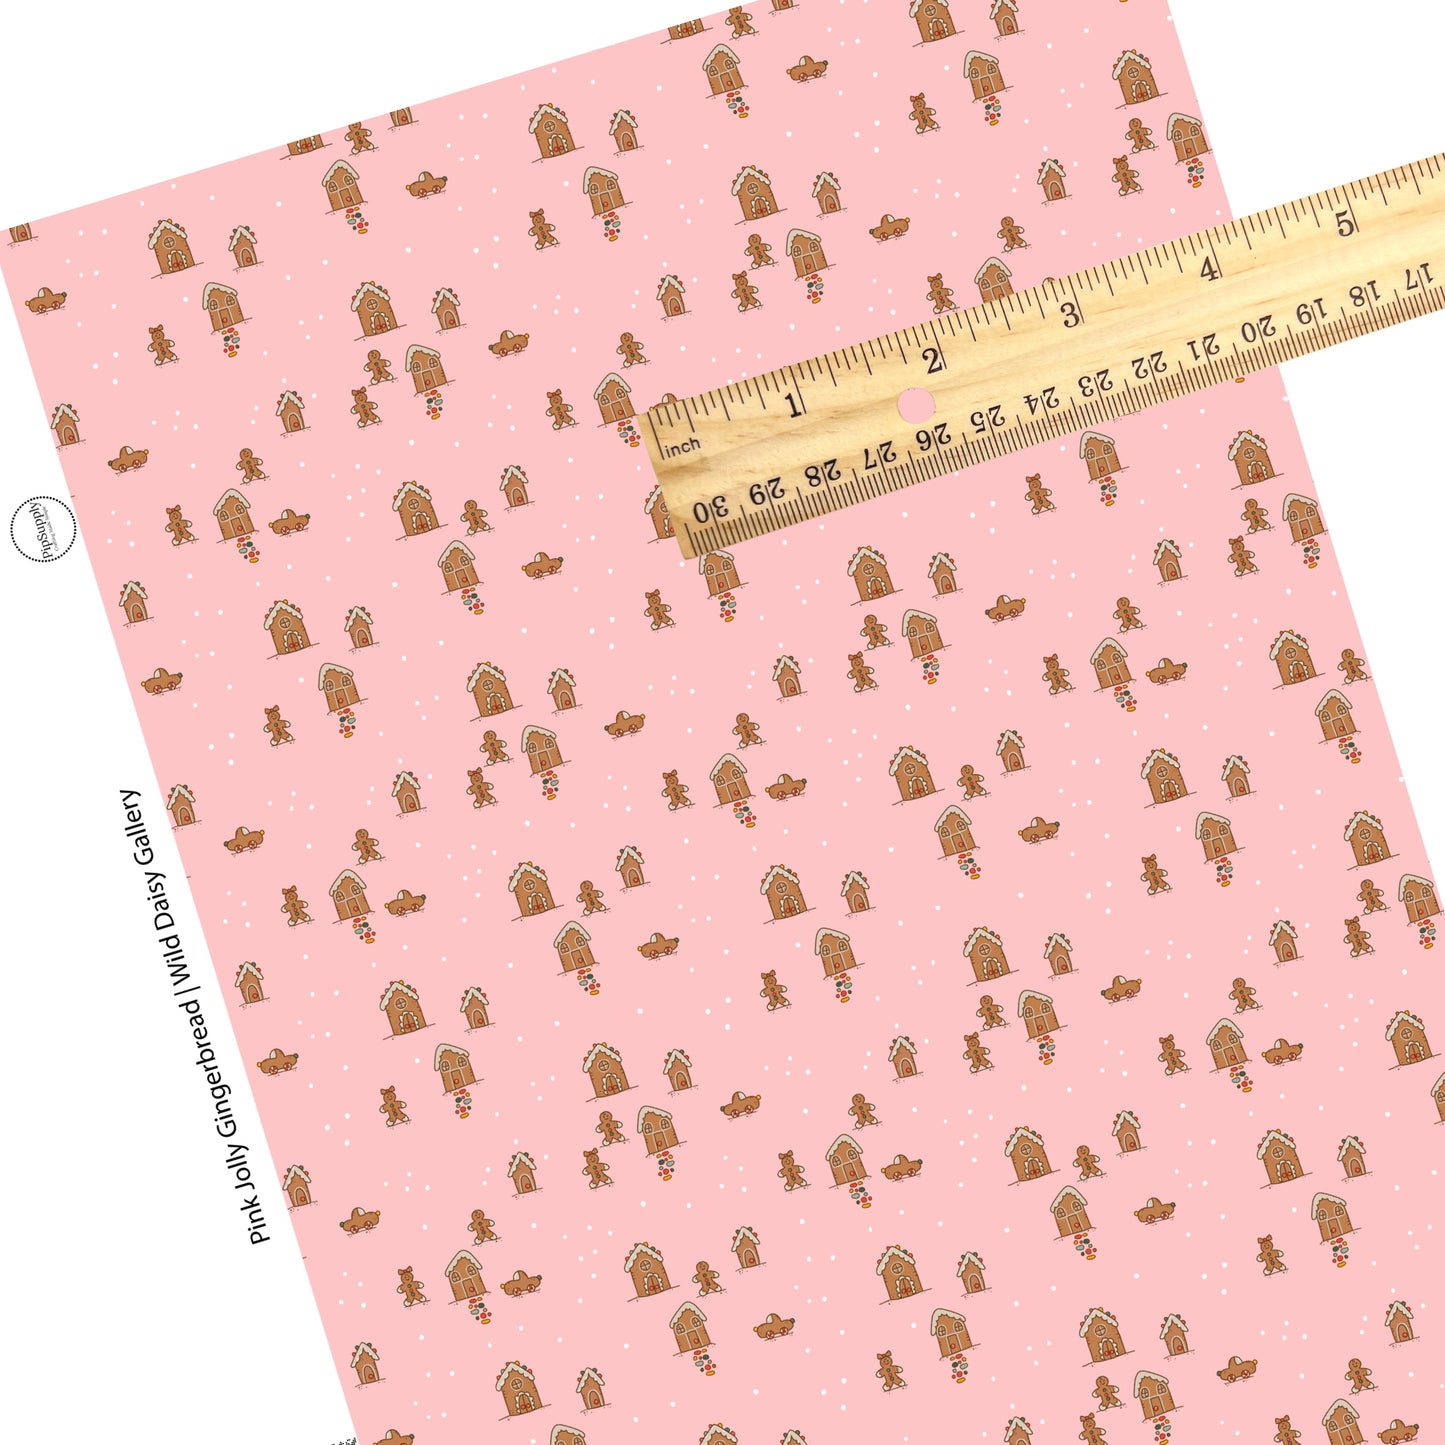 Tiny gingerbread houses, gingerbread man, and polka dots on pink faux leather sheets